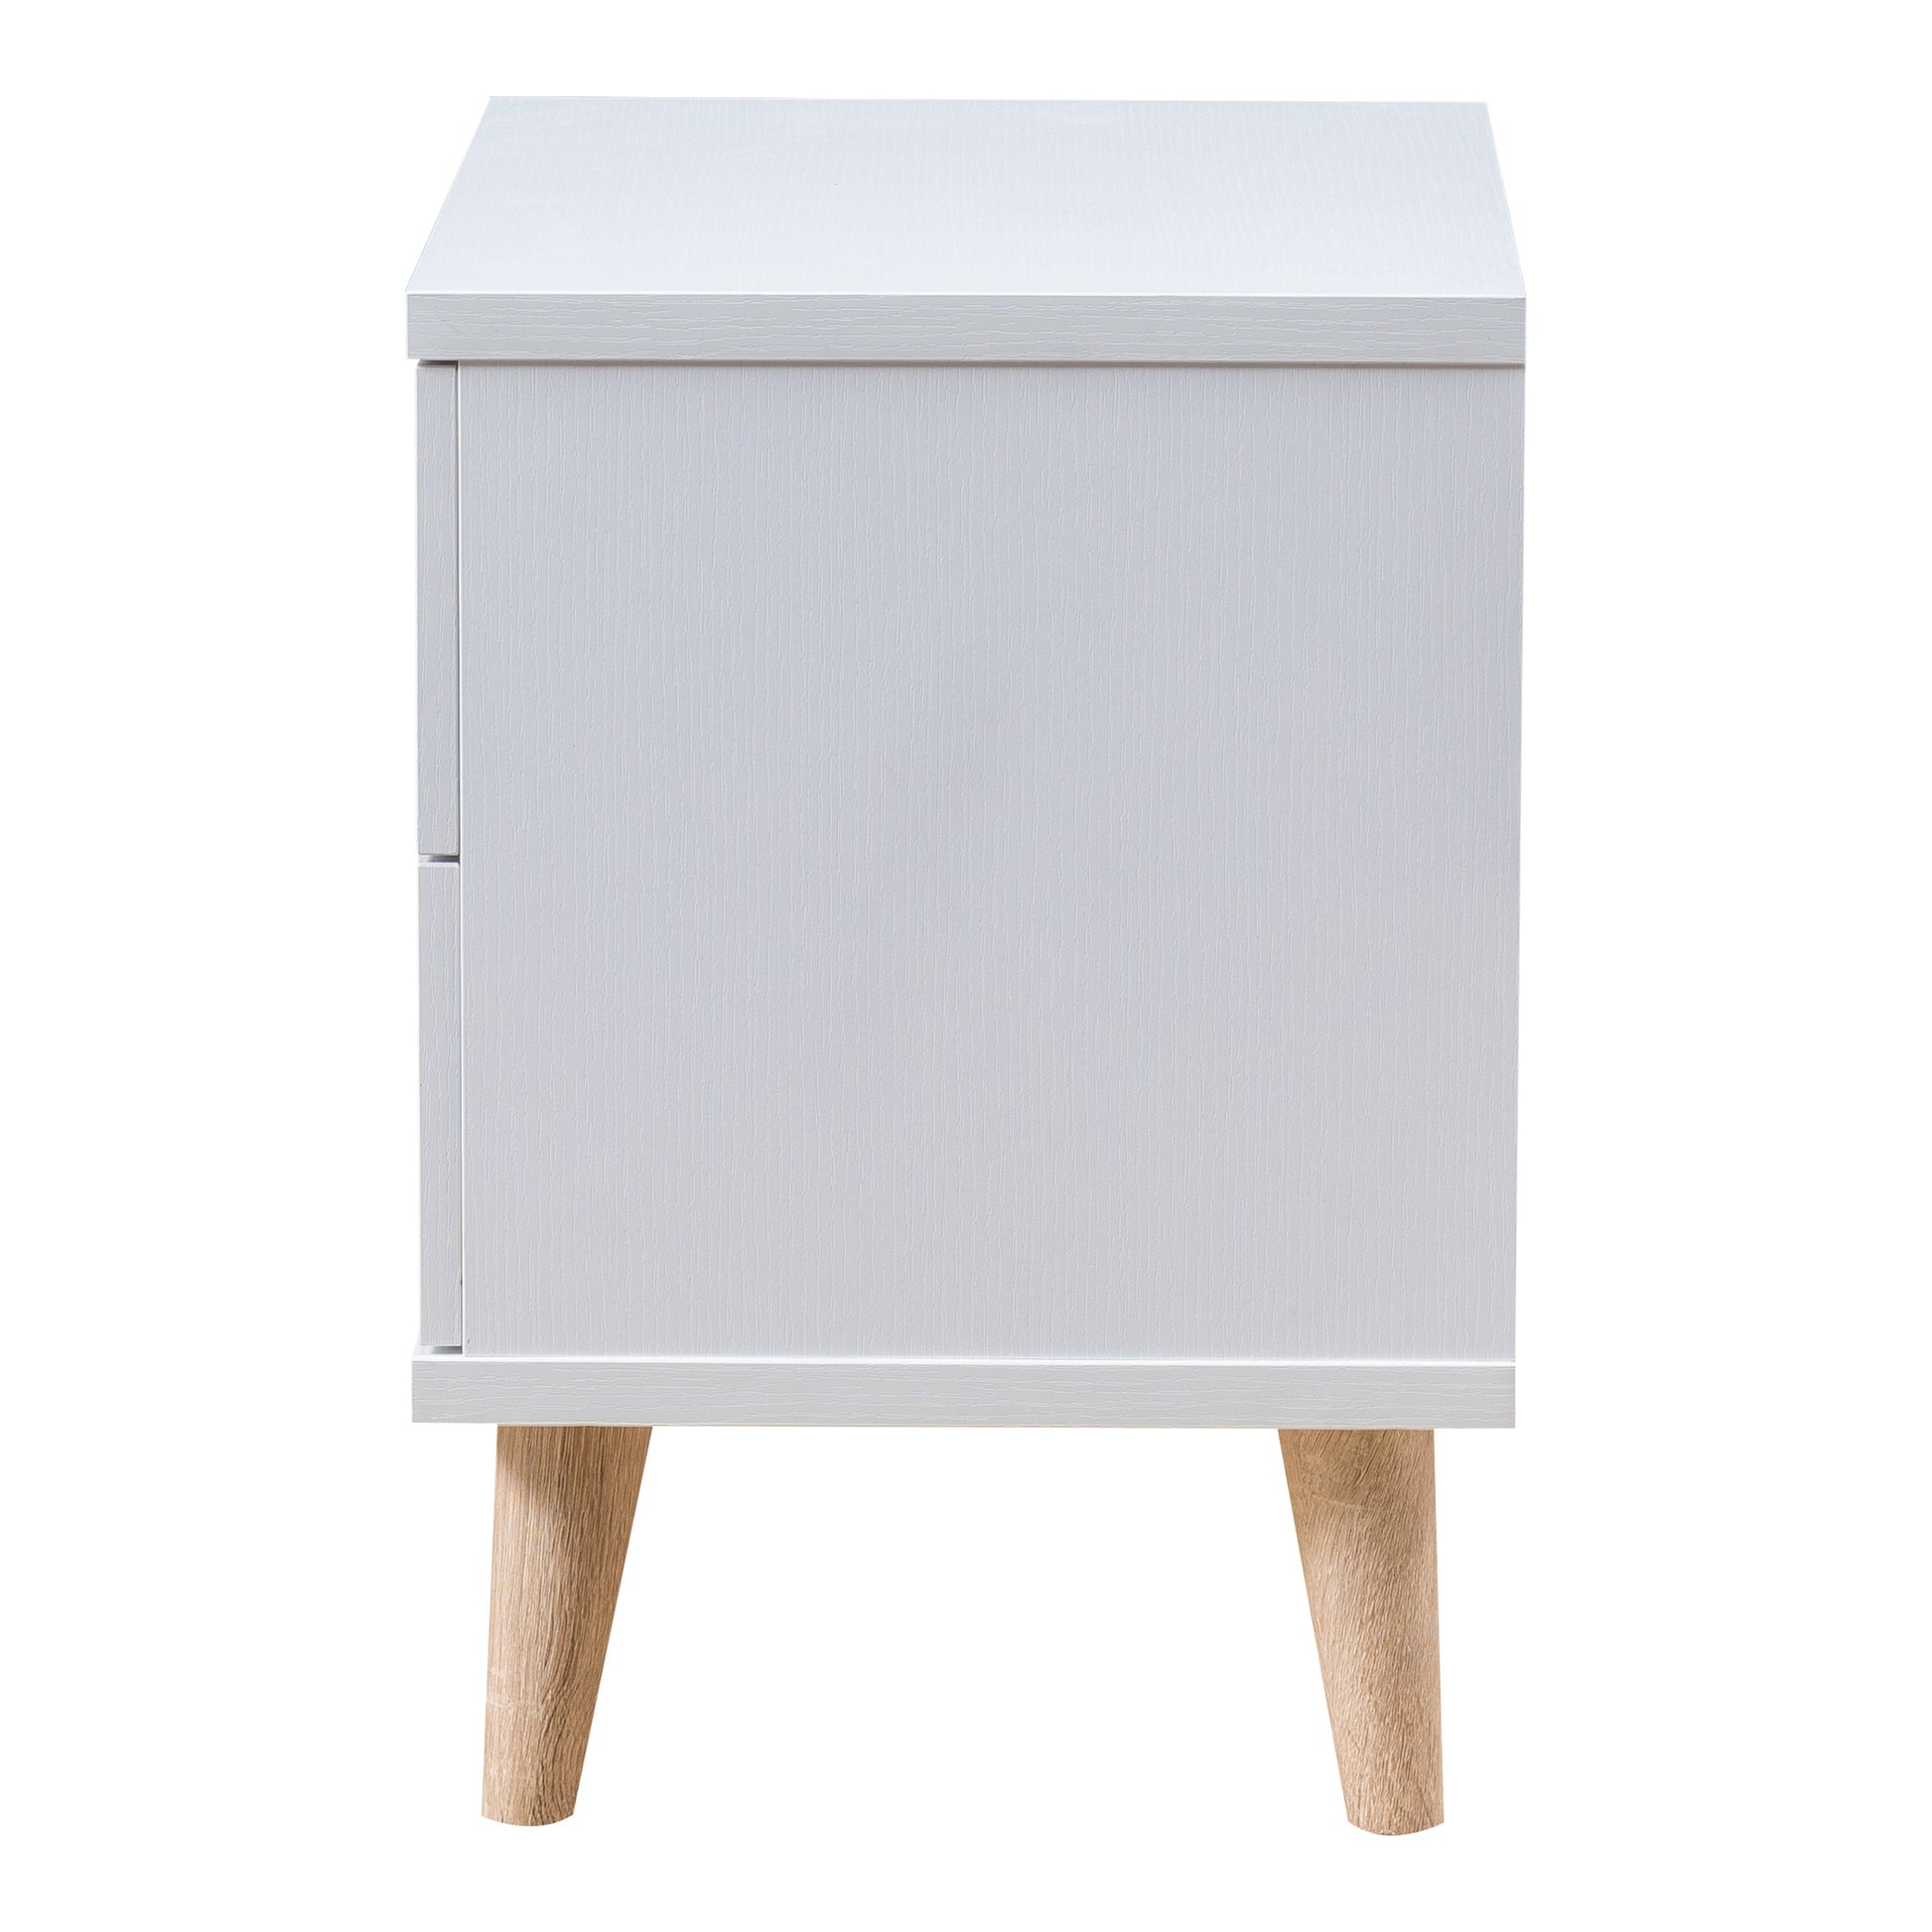 Front-facing side view of a mid-century modern white two-drawer nightstand on a white background